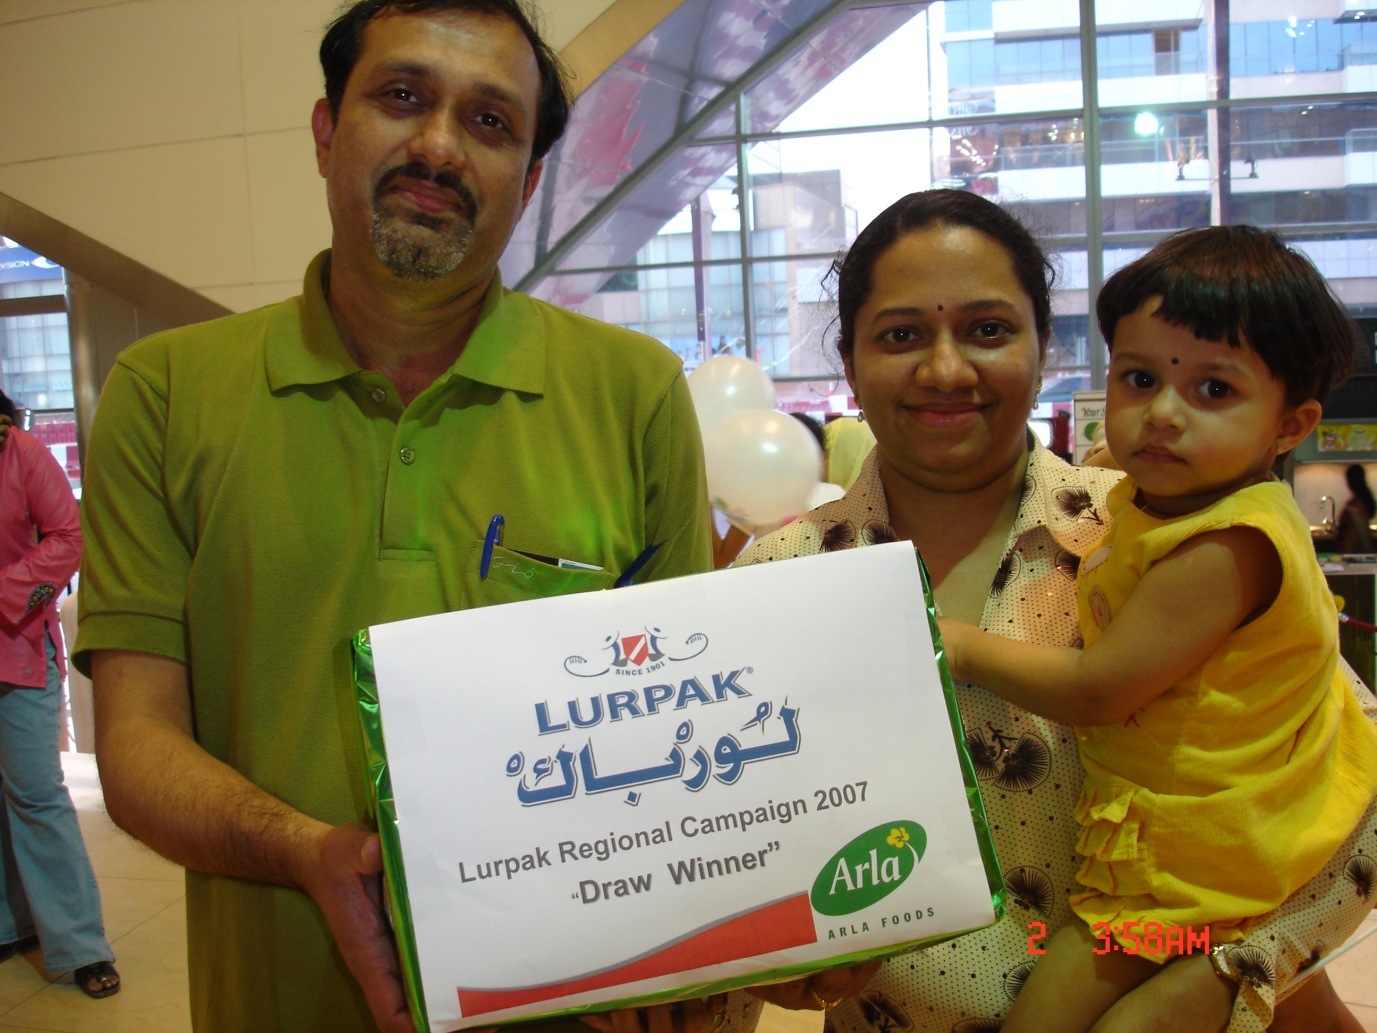 Fame lifestyle delivers Lurpak gift to a winner in the mall